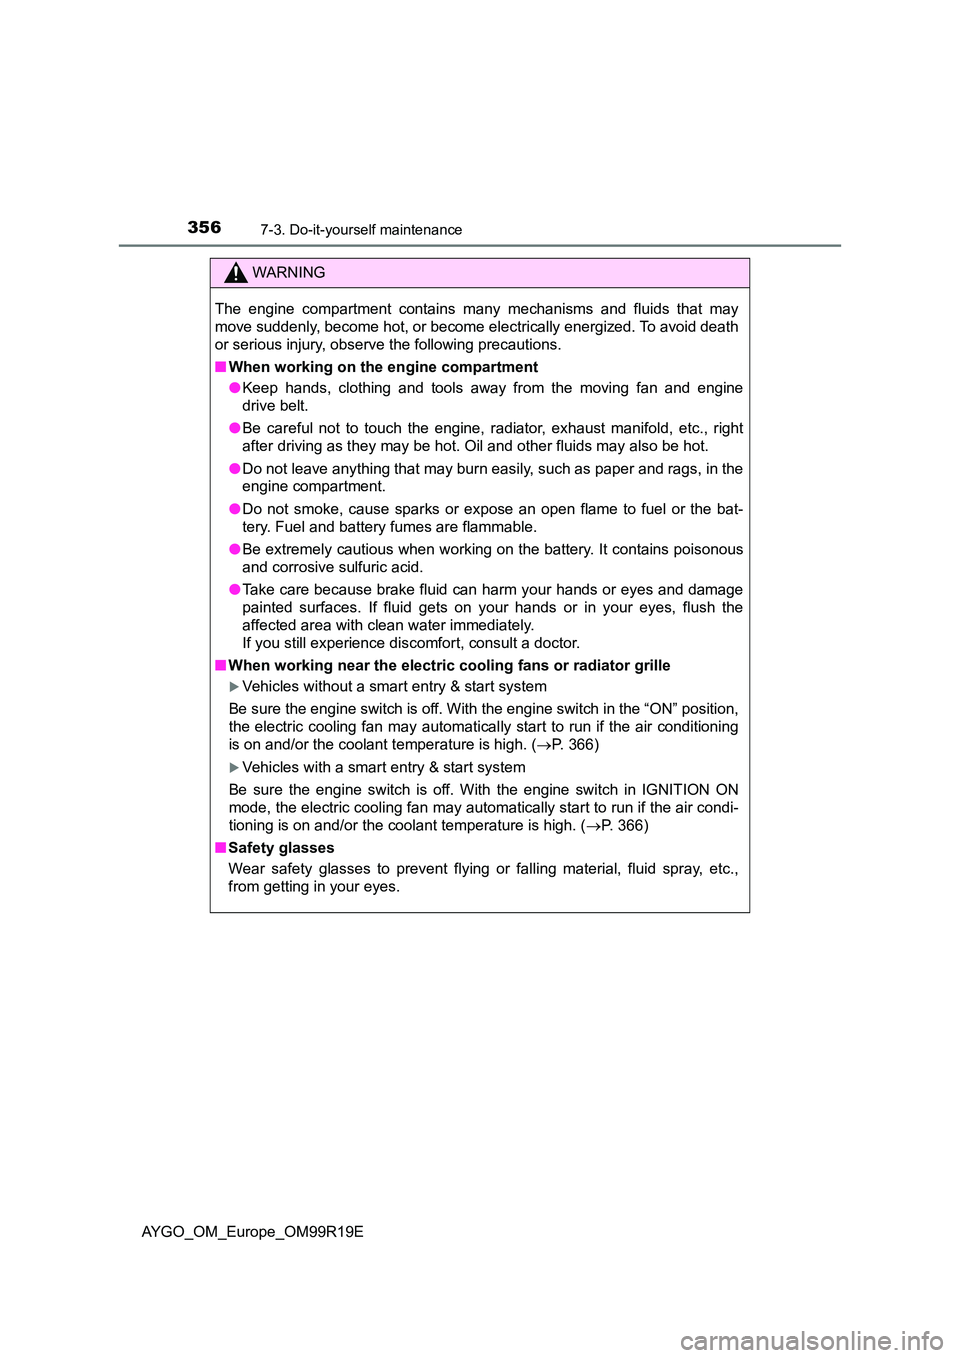 TOYOTA AYGO 2019  Owners Manual (in English) 3567-3. Do-it-yourself maintenance
AYGO_OM_Europe_OM99R19E
WARNING
The engine compartment contains many mechanisms and fluids that may 
move suddenly, become hot, or become el ectrically energized. To